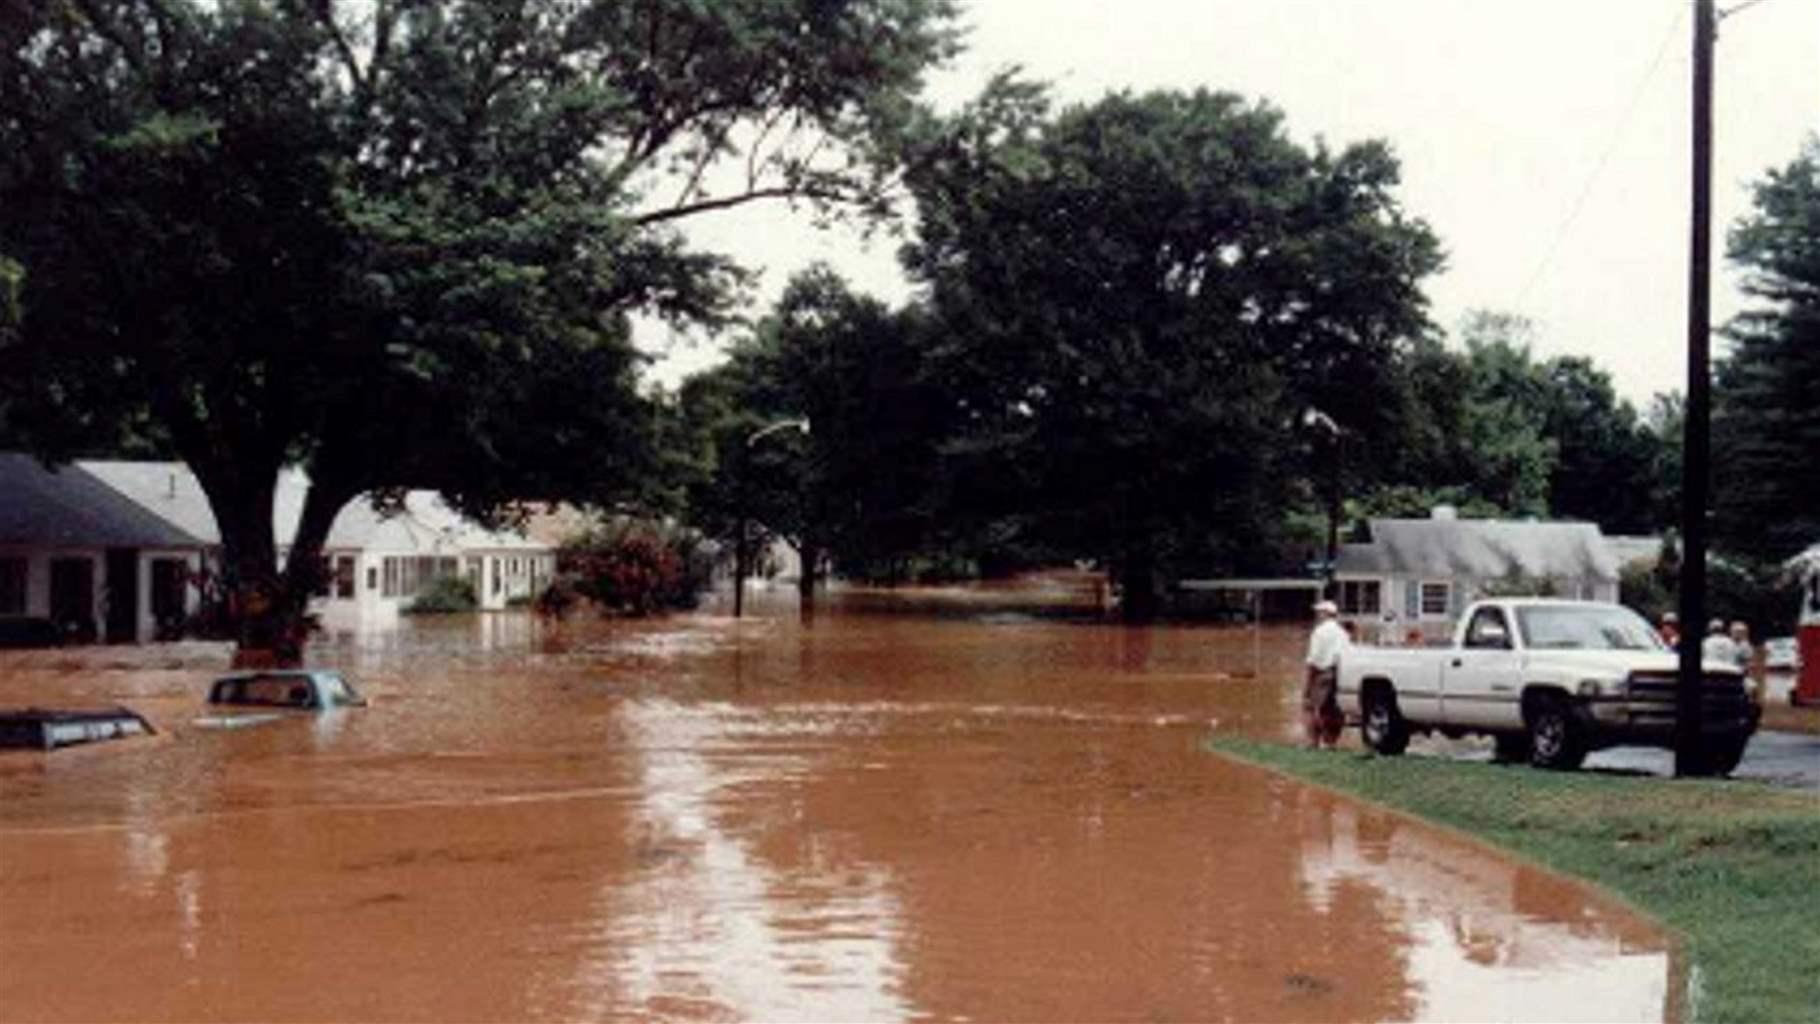 Westfield Road in Charlotte, North Carolina, during a flood on Aug. 4, 2011, left, and after Mecklenburg County’s Floodplain Buyout Program bought and removed homes on the street and converted the land into greenspace, right, which helps absorb excess water and provides environmental and recreational co-benefits.